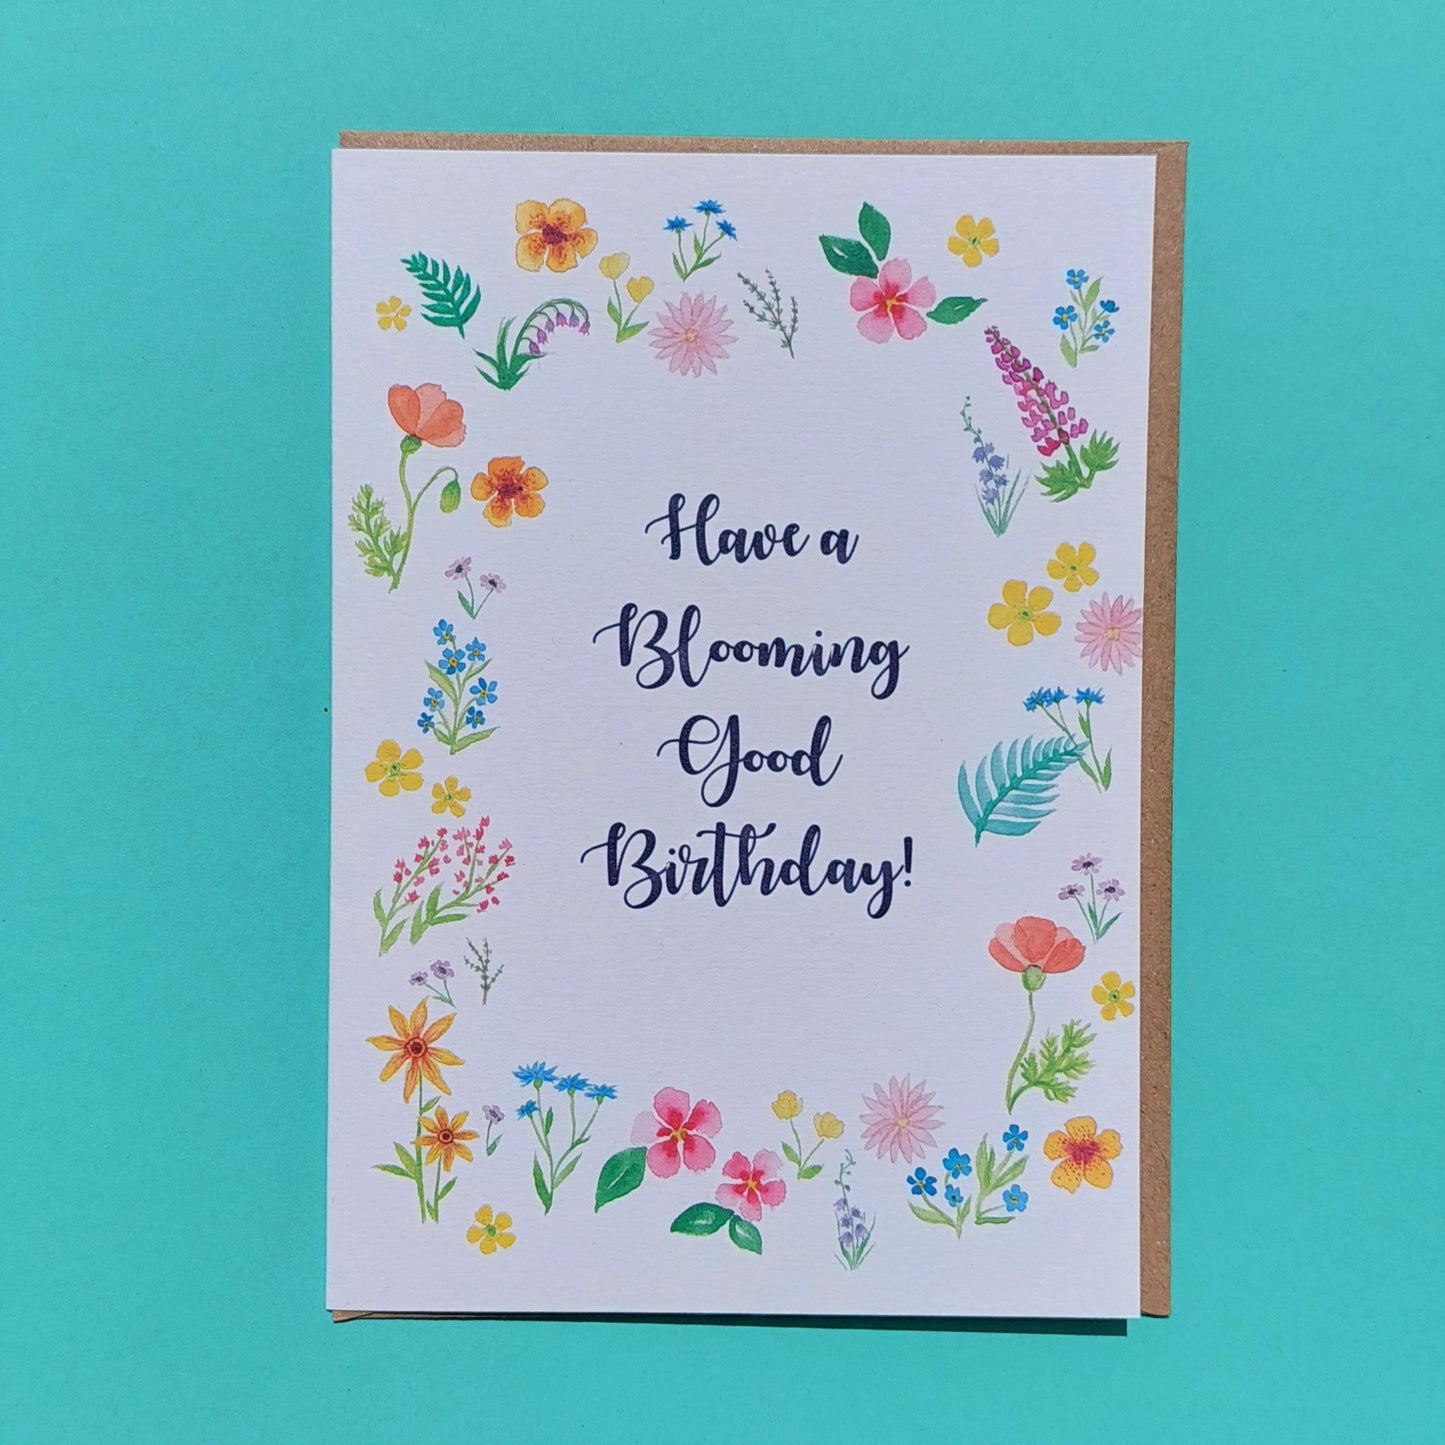 Have a Blooming Good Birthday! Card